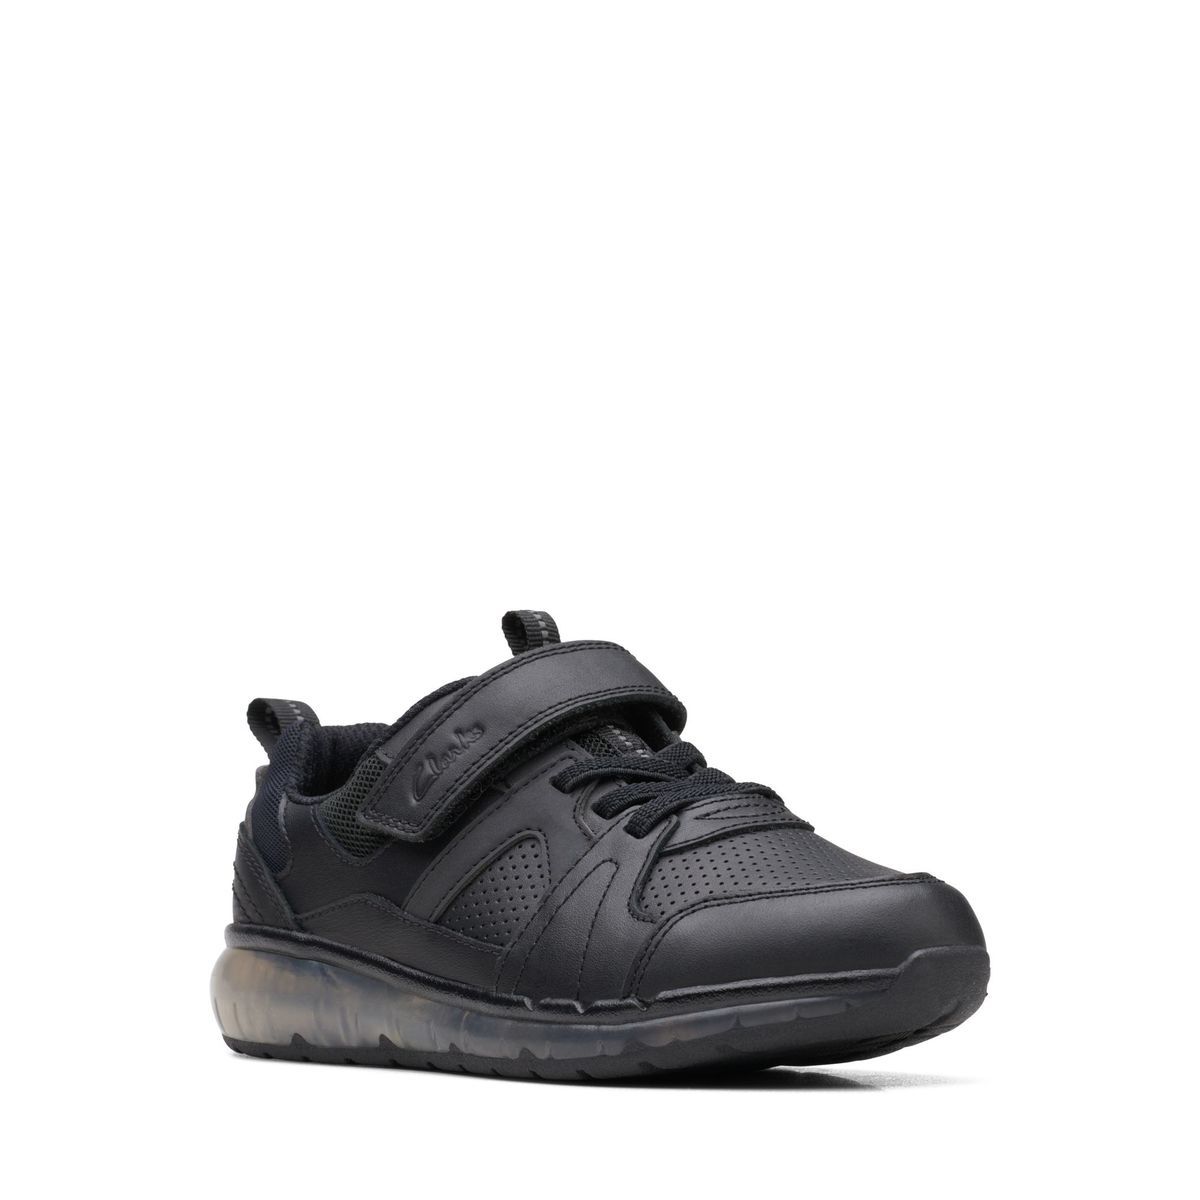 Clarks Spark Beam K Black Leather Kids Boys Trainers 679226F In Size 12.5 In Plain Black Leather F Width Fitting Regular Fit For School For kids